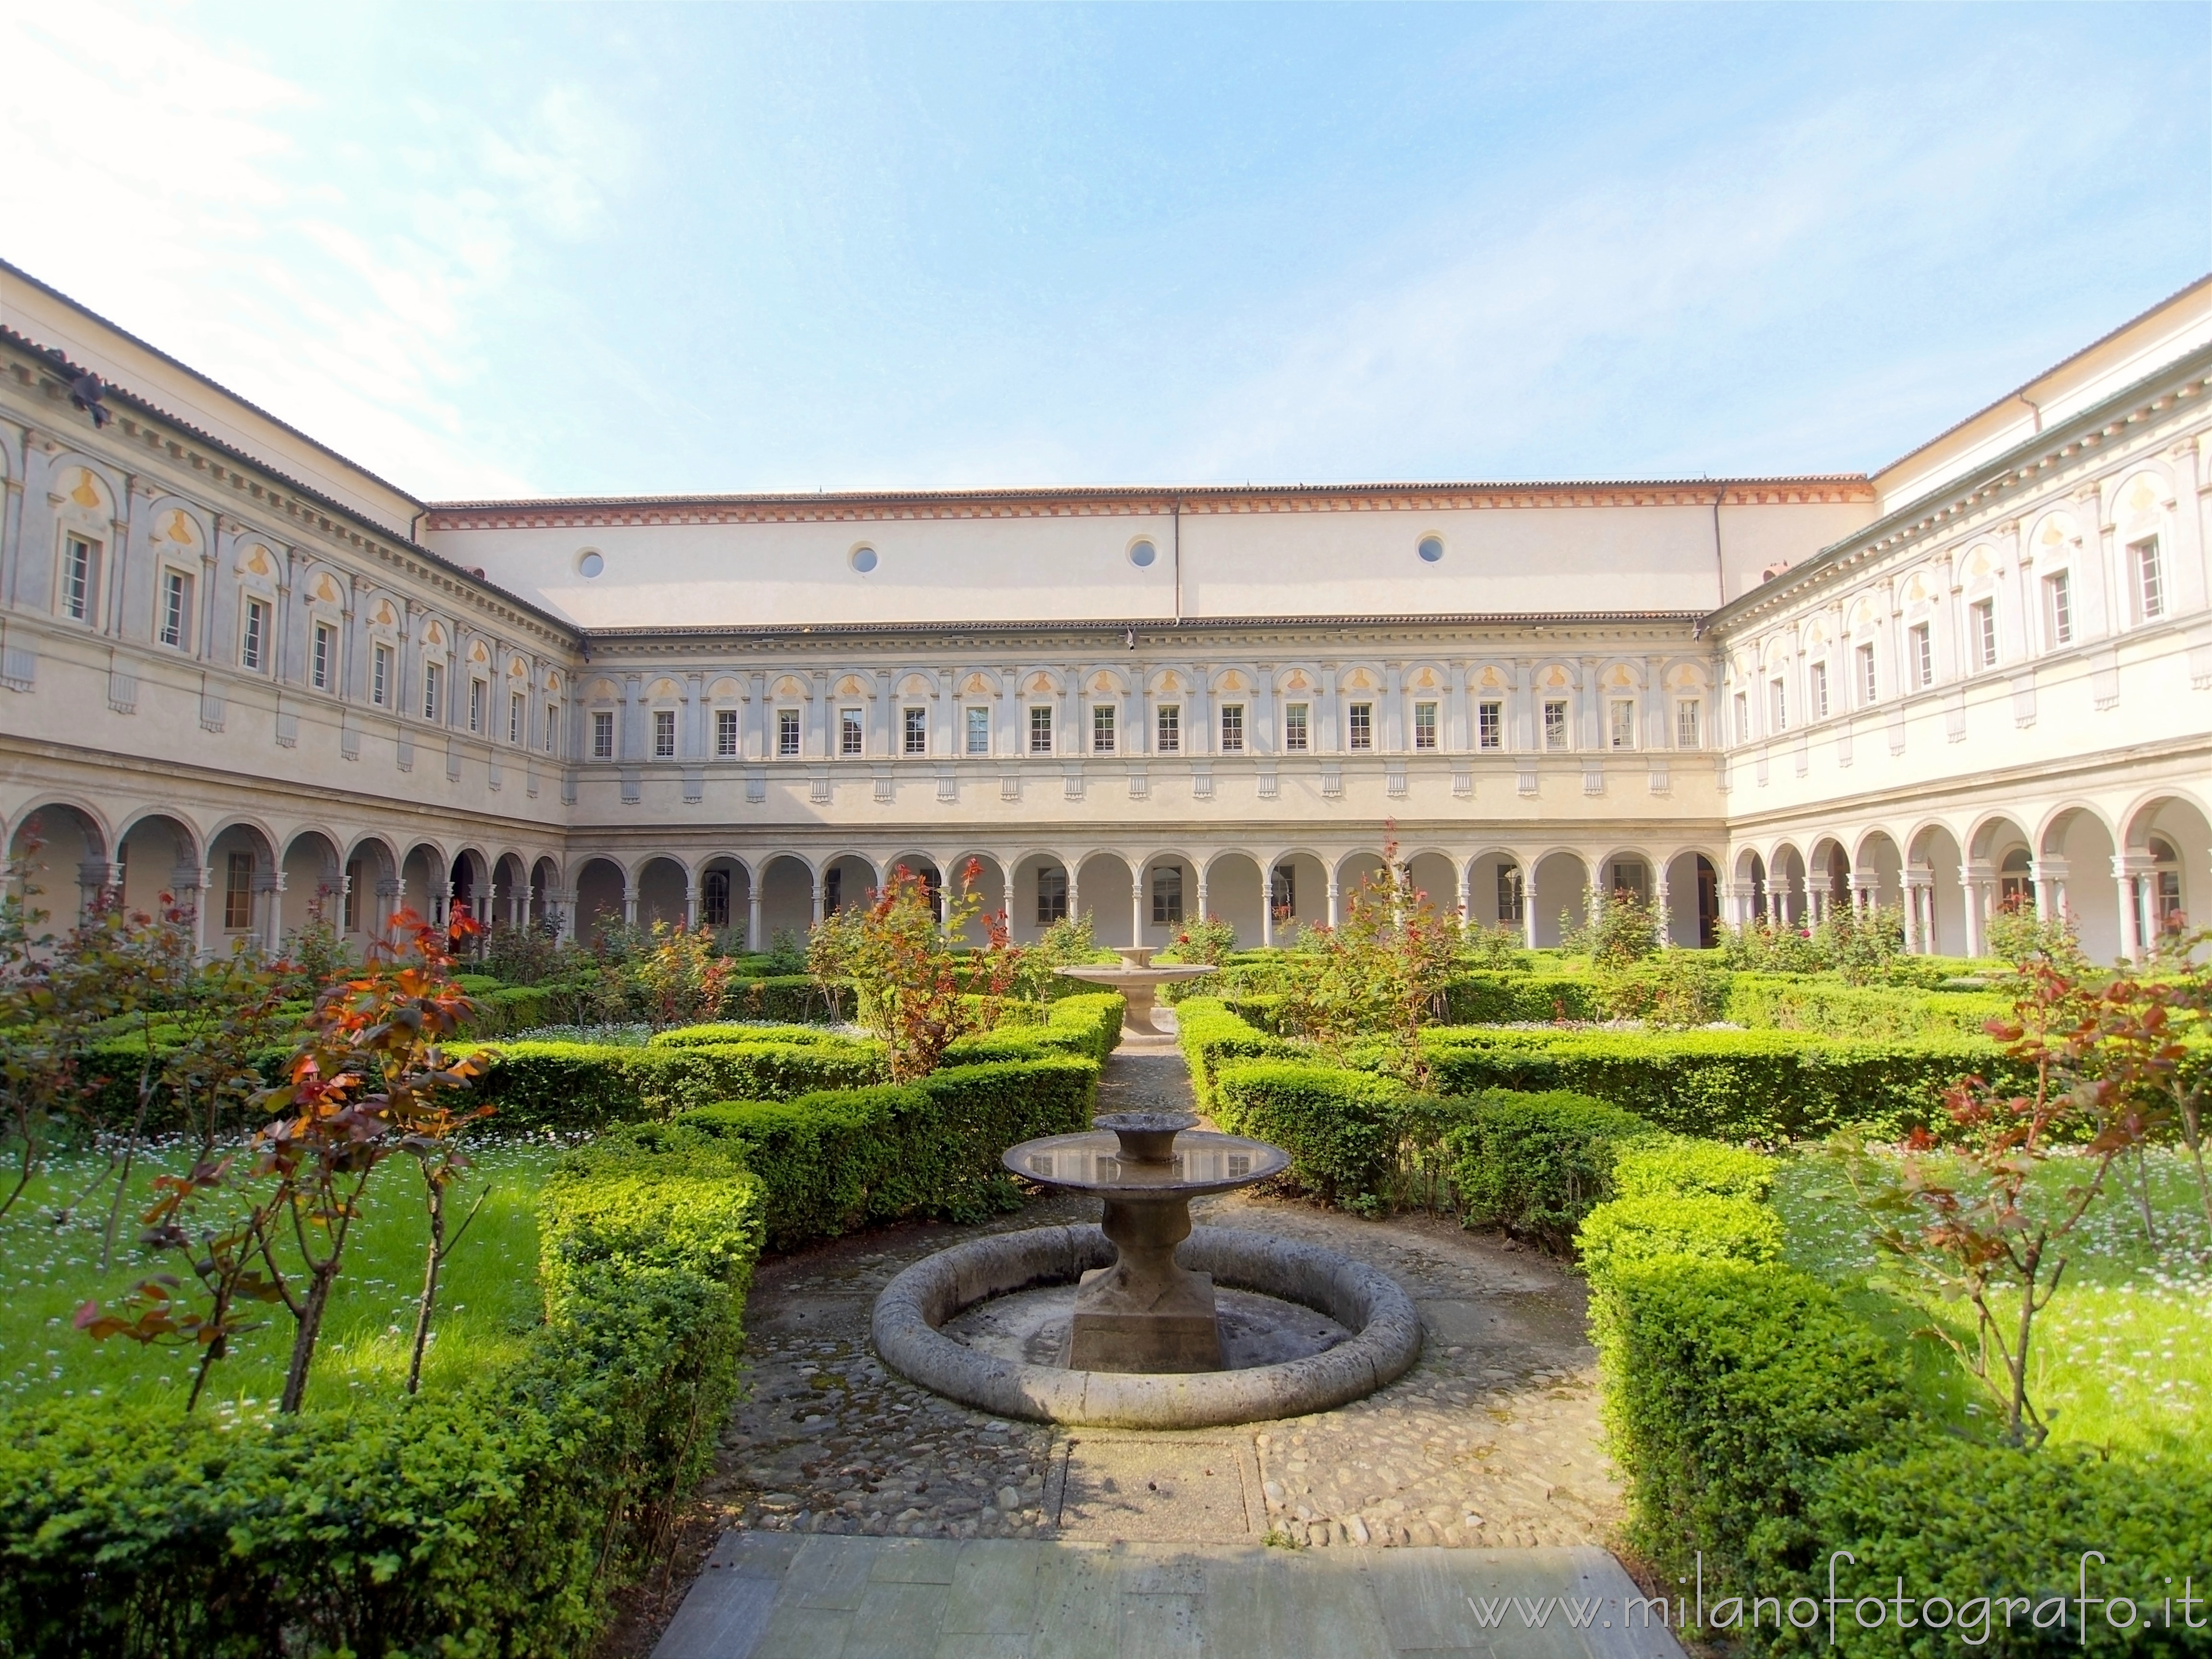 Milan (Italy): Cloisters of San Simpliciano - Cloister of the Two Columns - Milan (Italy)